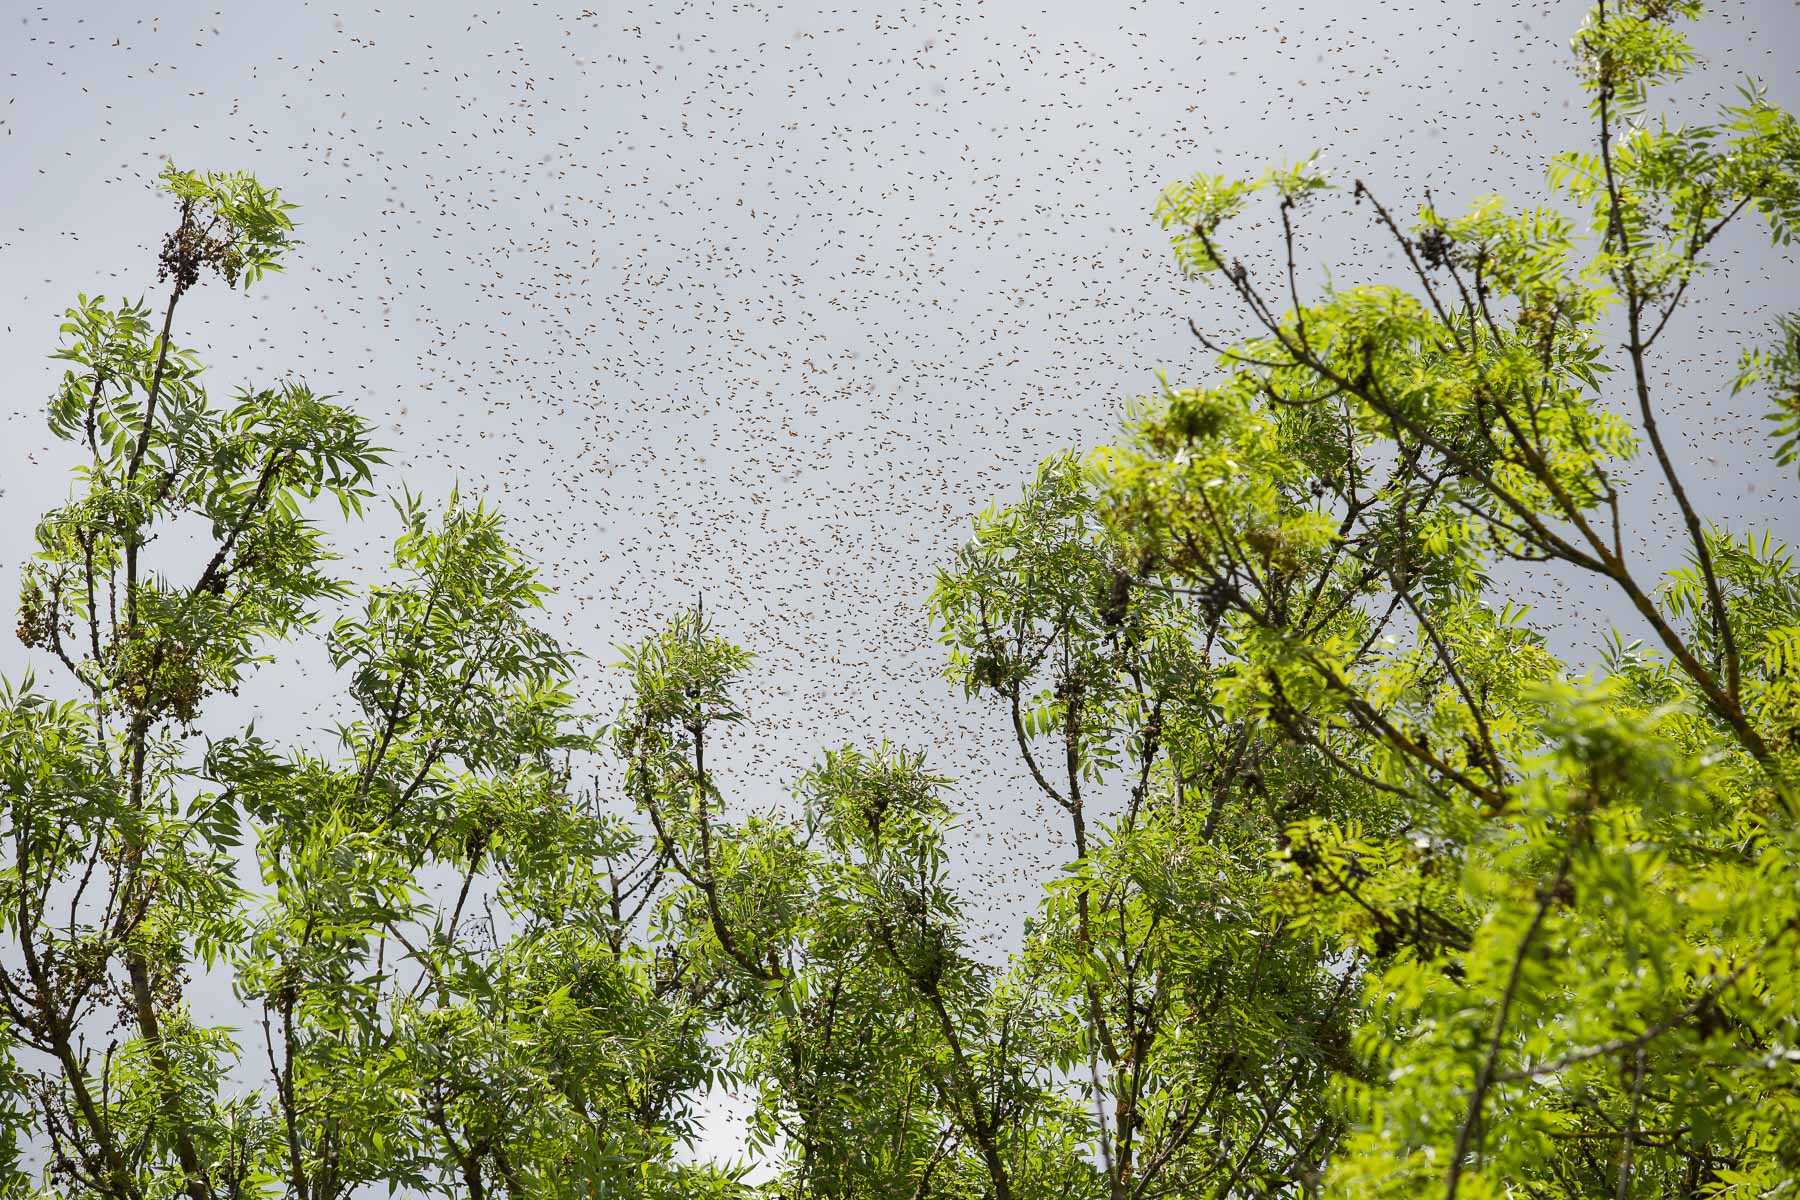 Swarming bees surround a treetop in Ljubljana. The municipality recently implemented a service of around five beekepers who voluntarily pick up swarms around the city and are now included in the emergency services under the number 112 just like the police and ambulance.